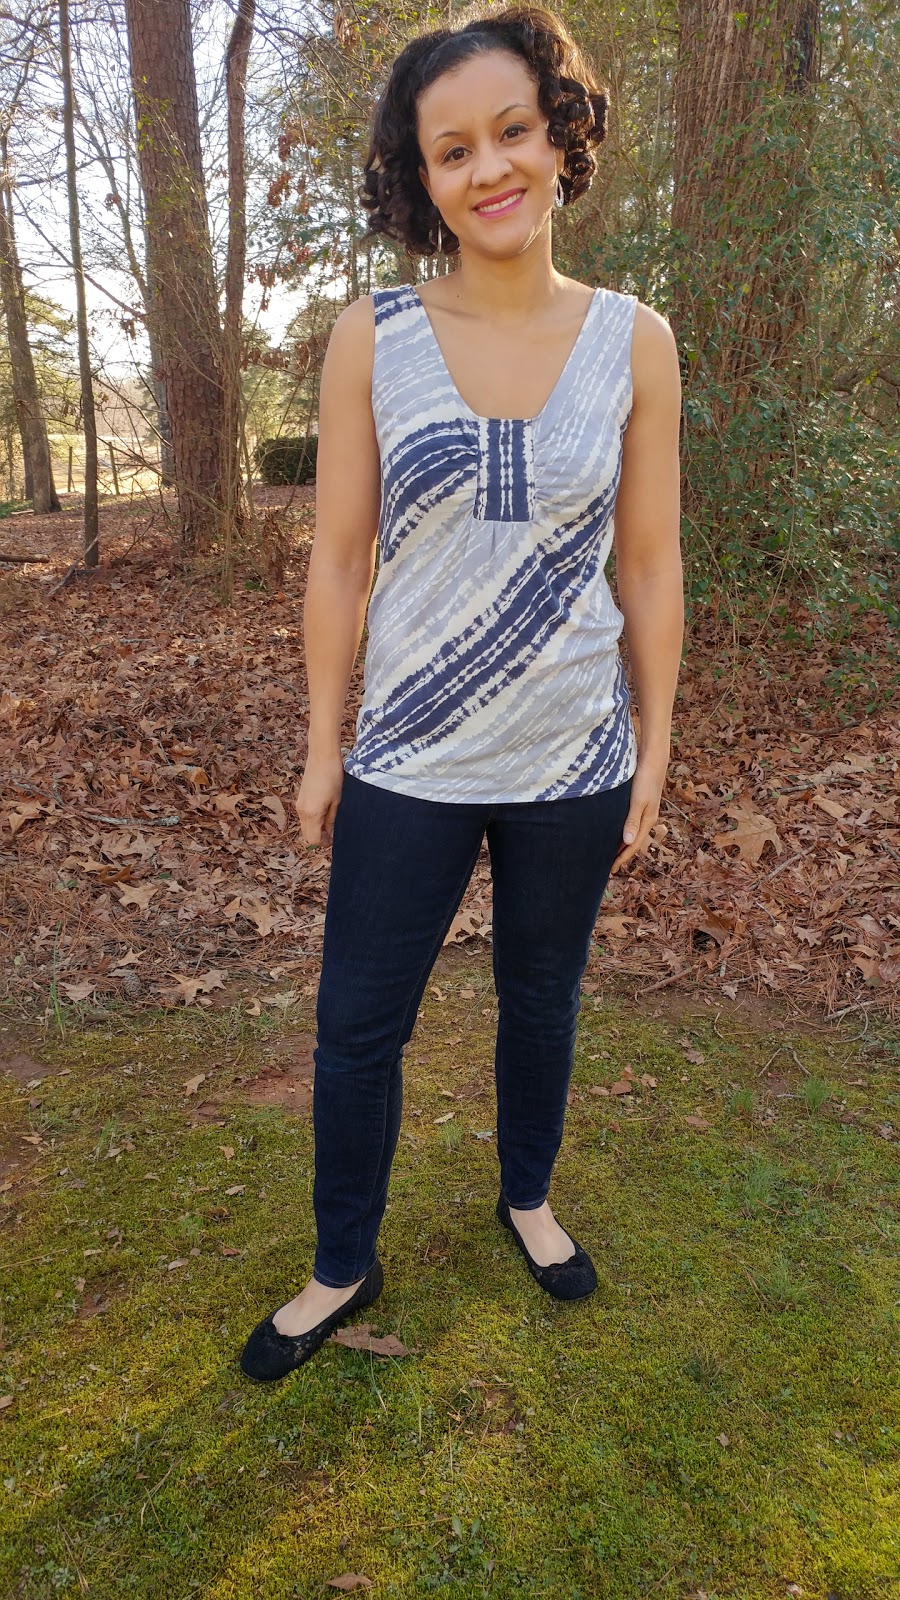 Sew Filled to the Brim: Off season sewing with the Adel Top